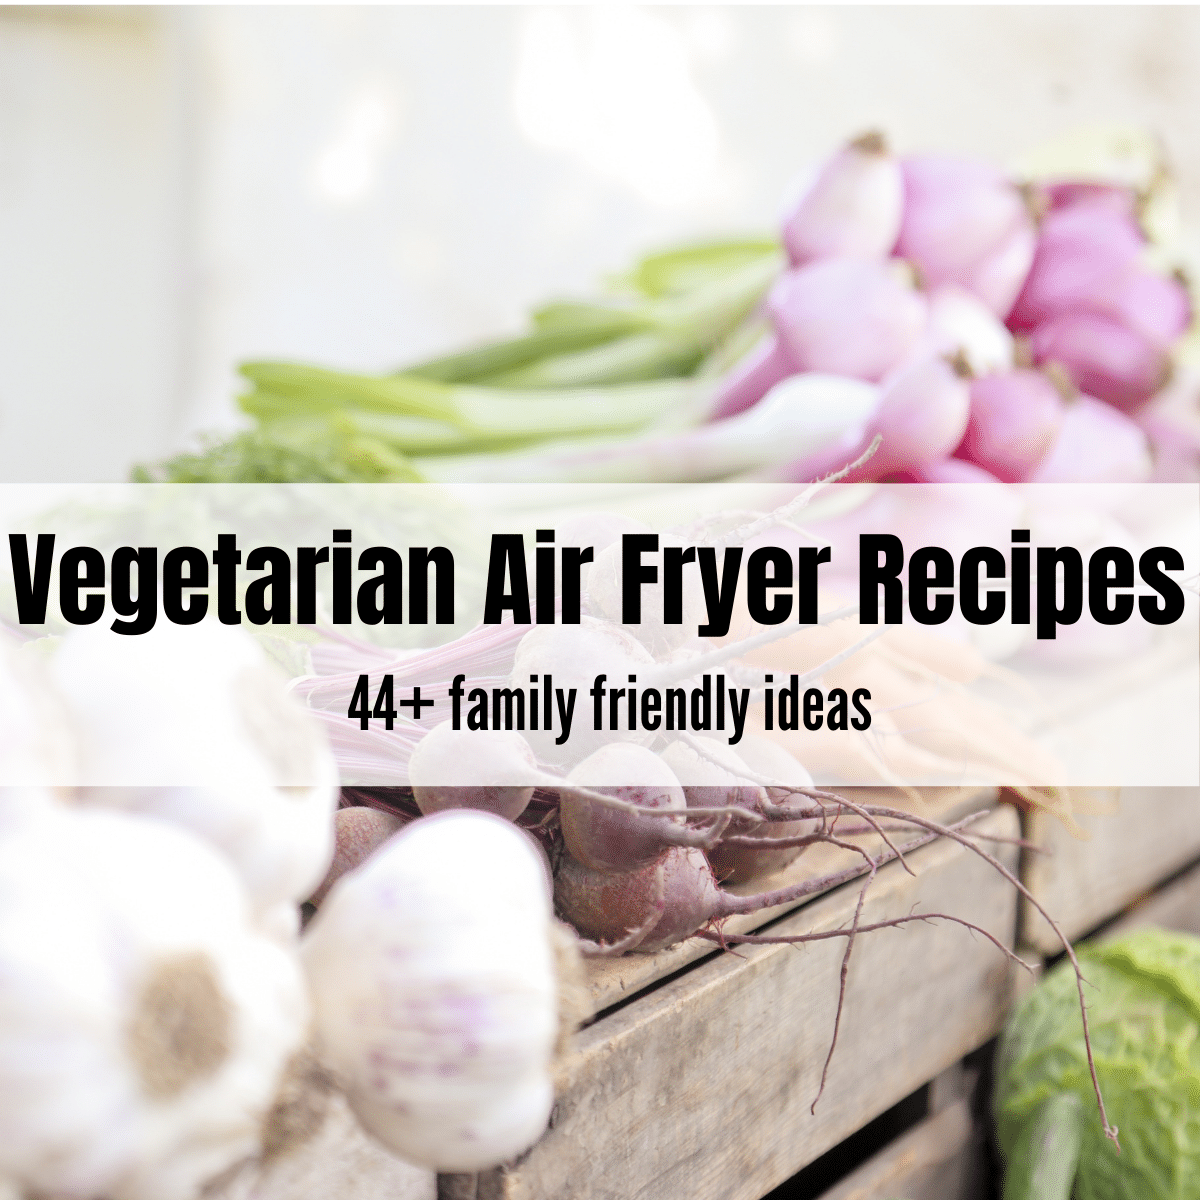 text overlay saying: Vegetarian Air Fryer Recipes on top of a picture of vegetables